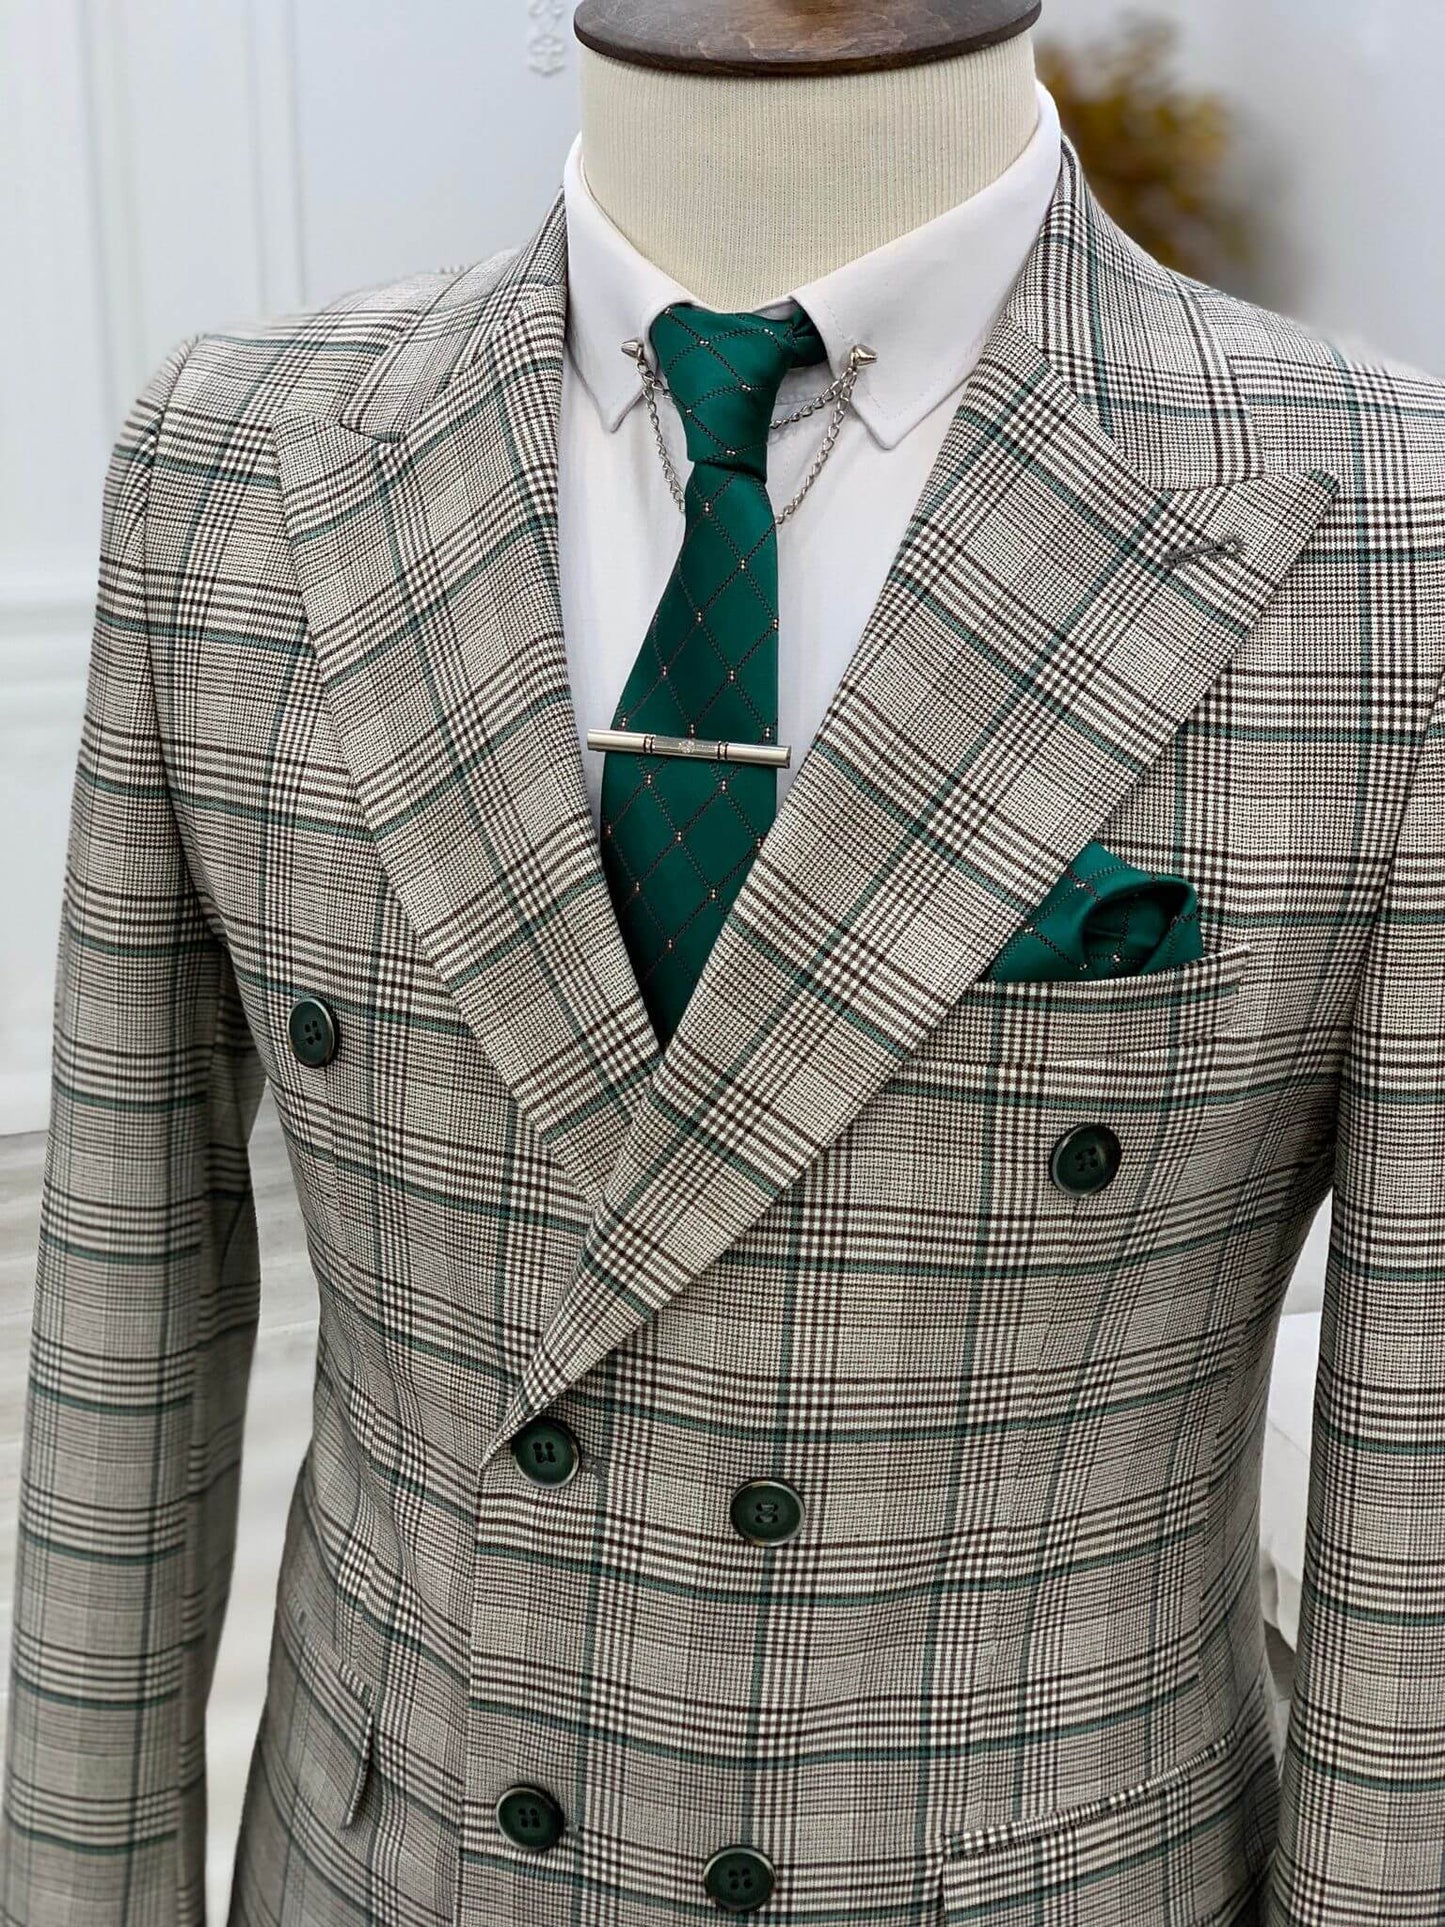 Green Double Breasted Suit